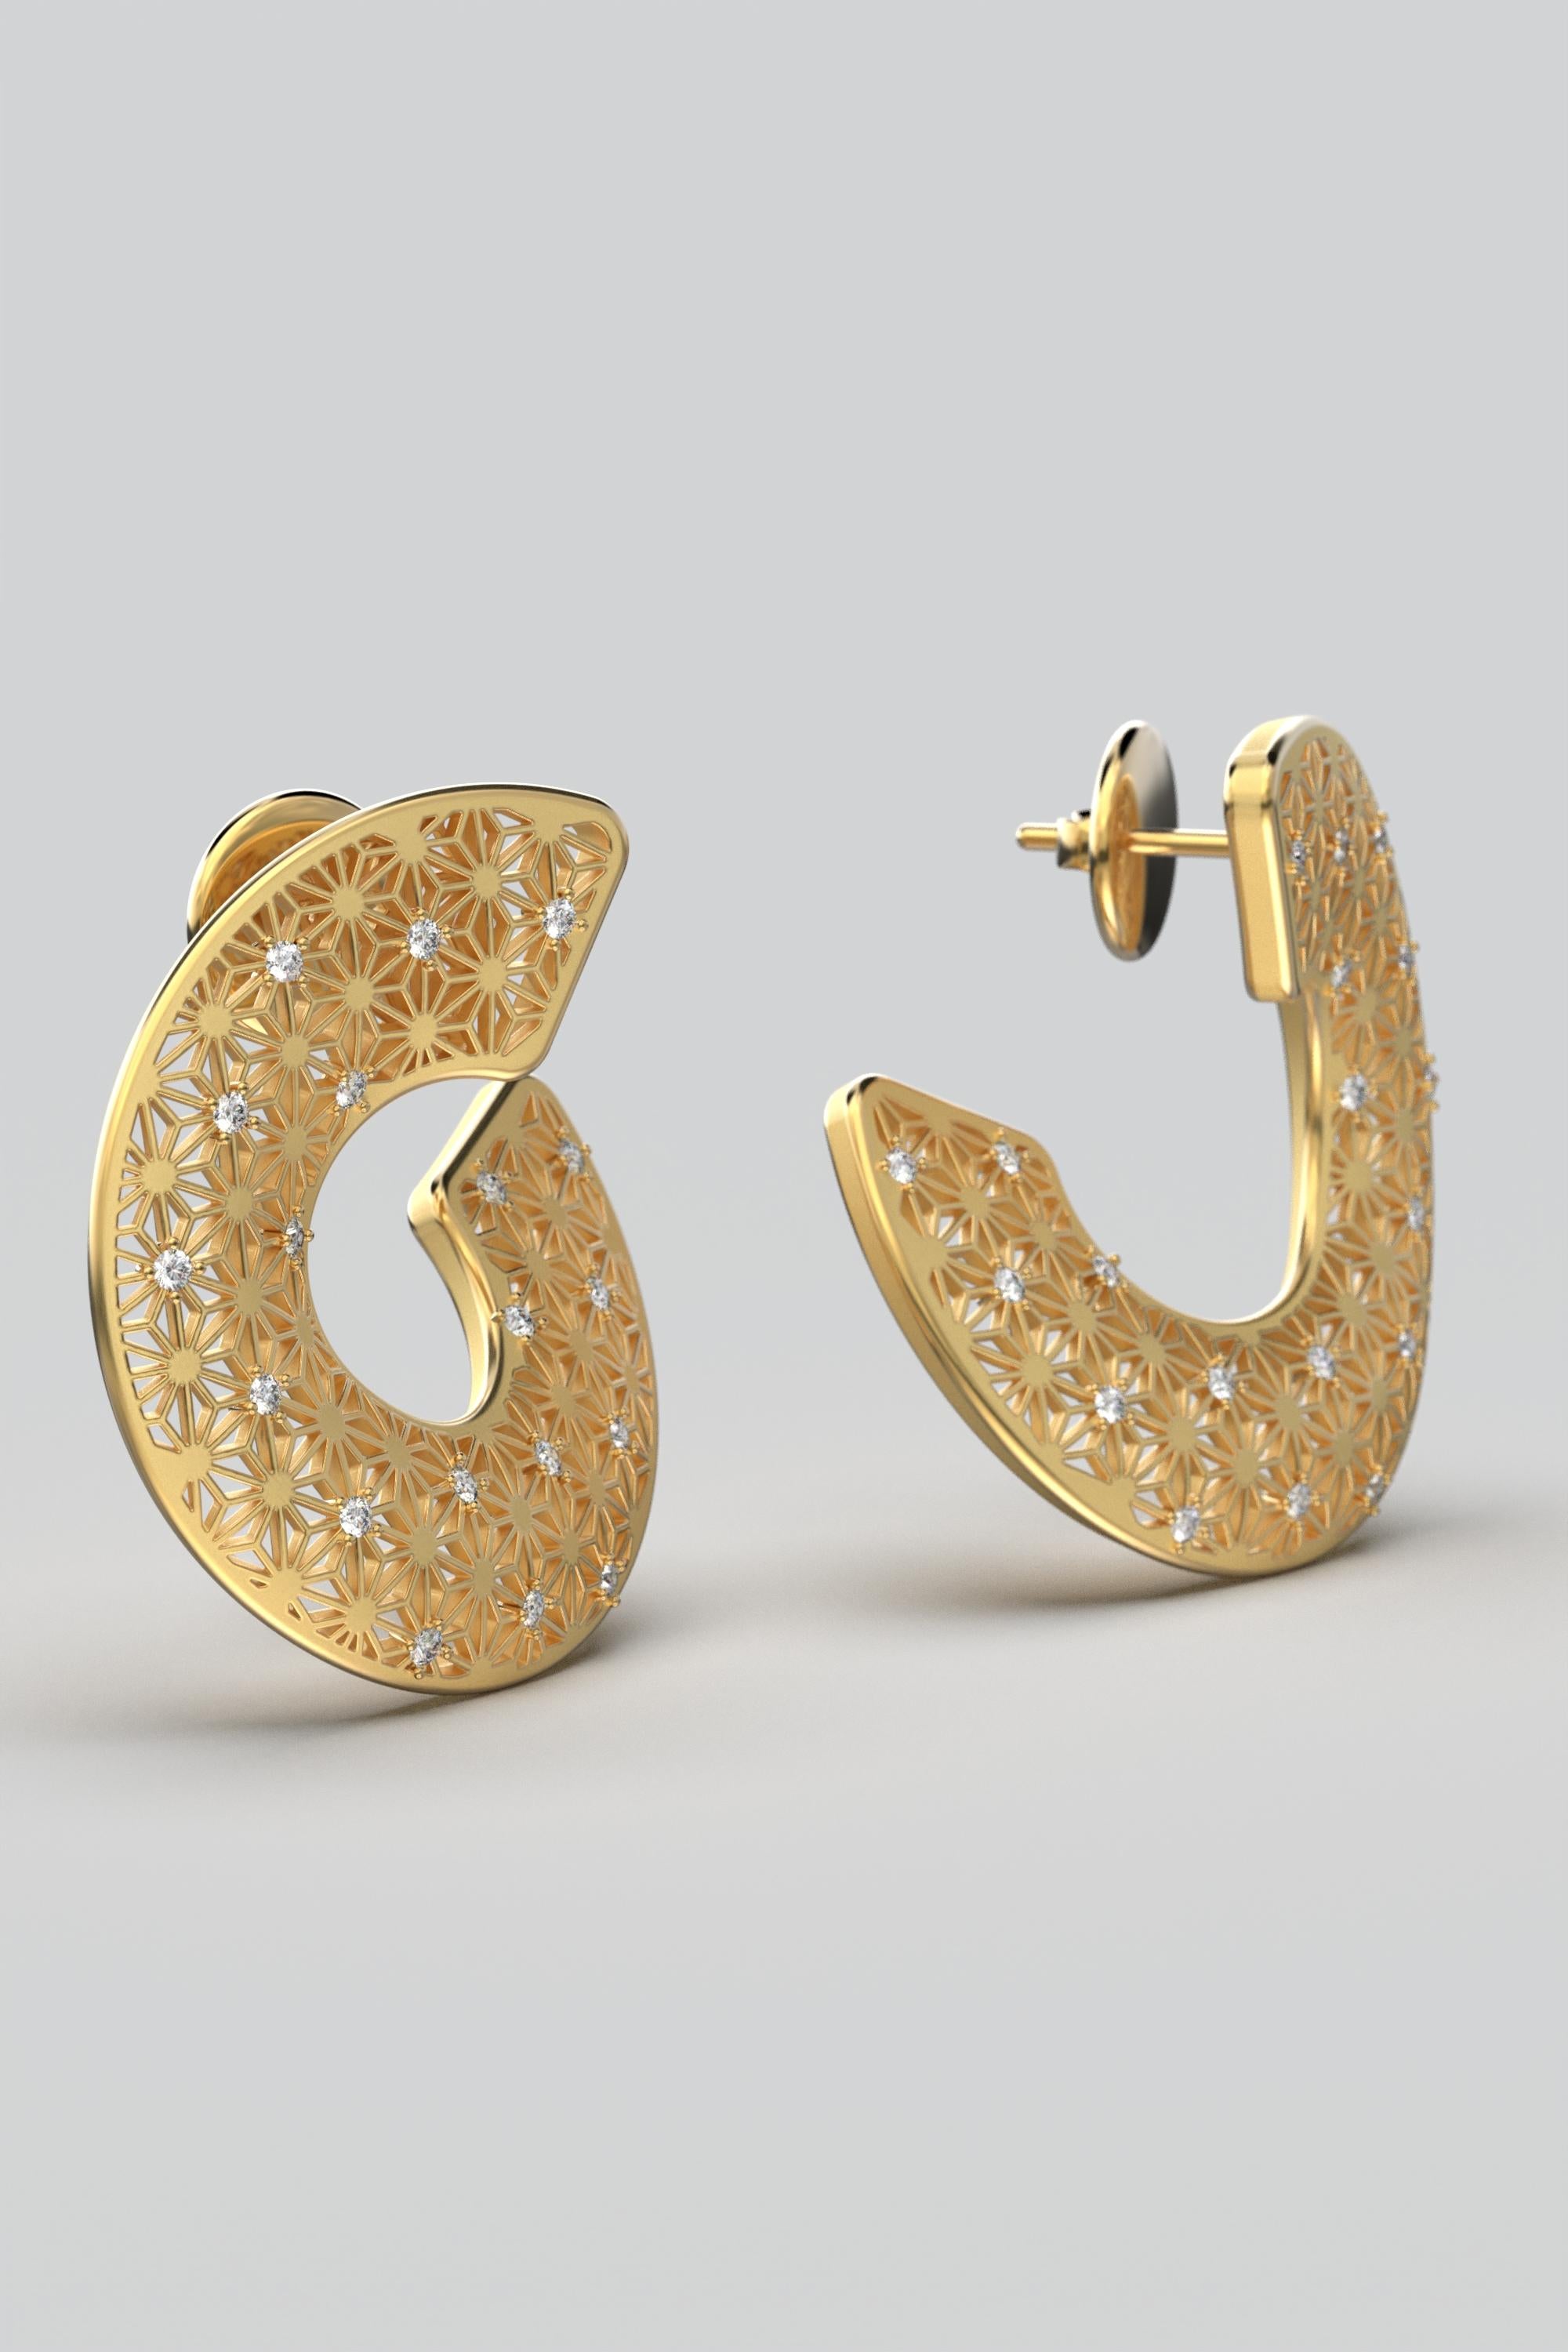 Made to Order.
Elevate your style with bold sophistication - discover Oltremare Gioielli's statement diamond earrings, meticulously crafted in Italy from 18k gold. Adorned with 0.39 Ct of natural extra white diamonds, these stunning large earrings